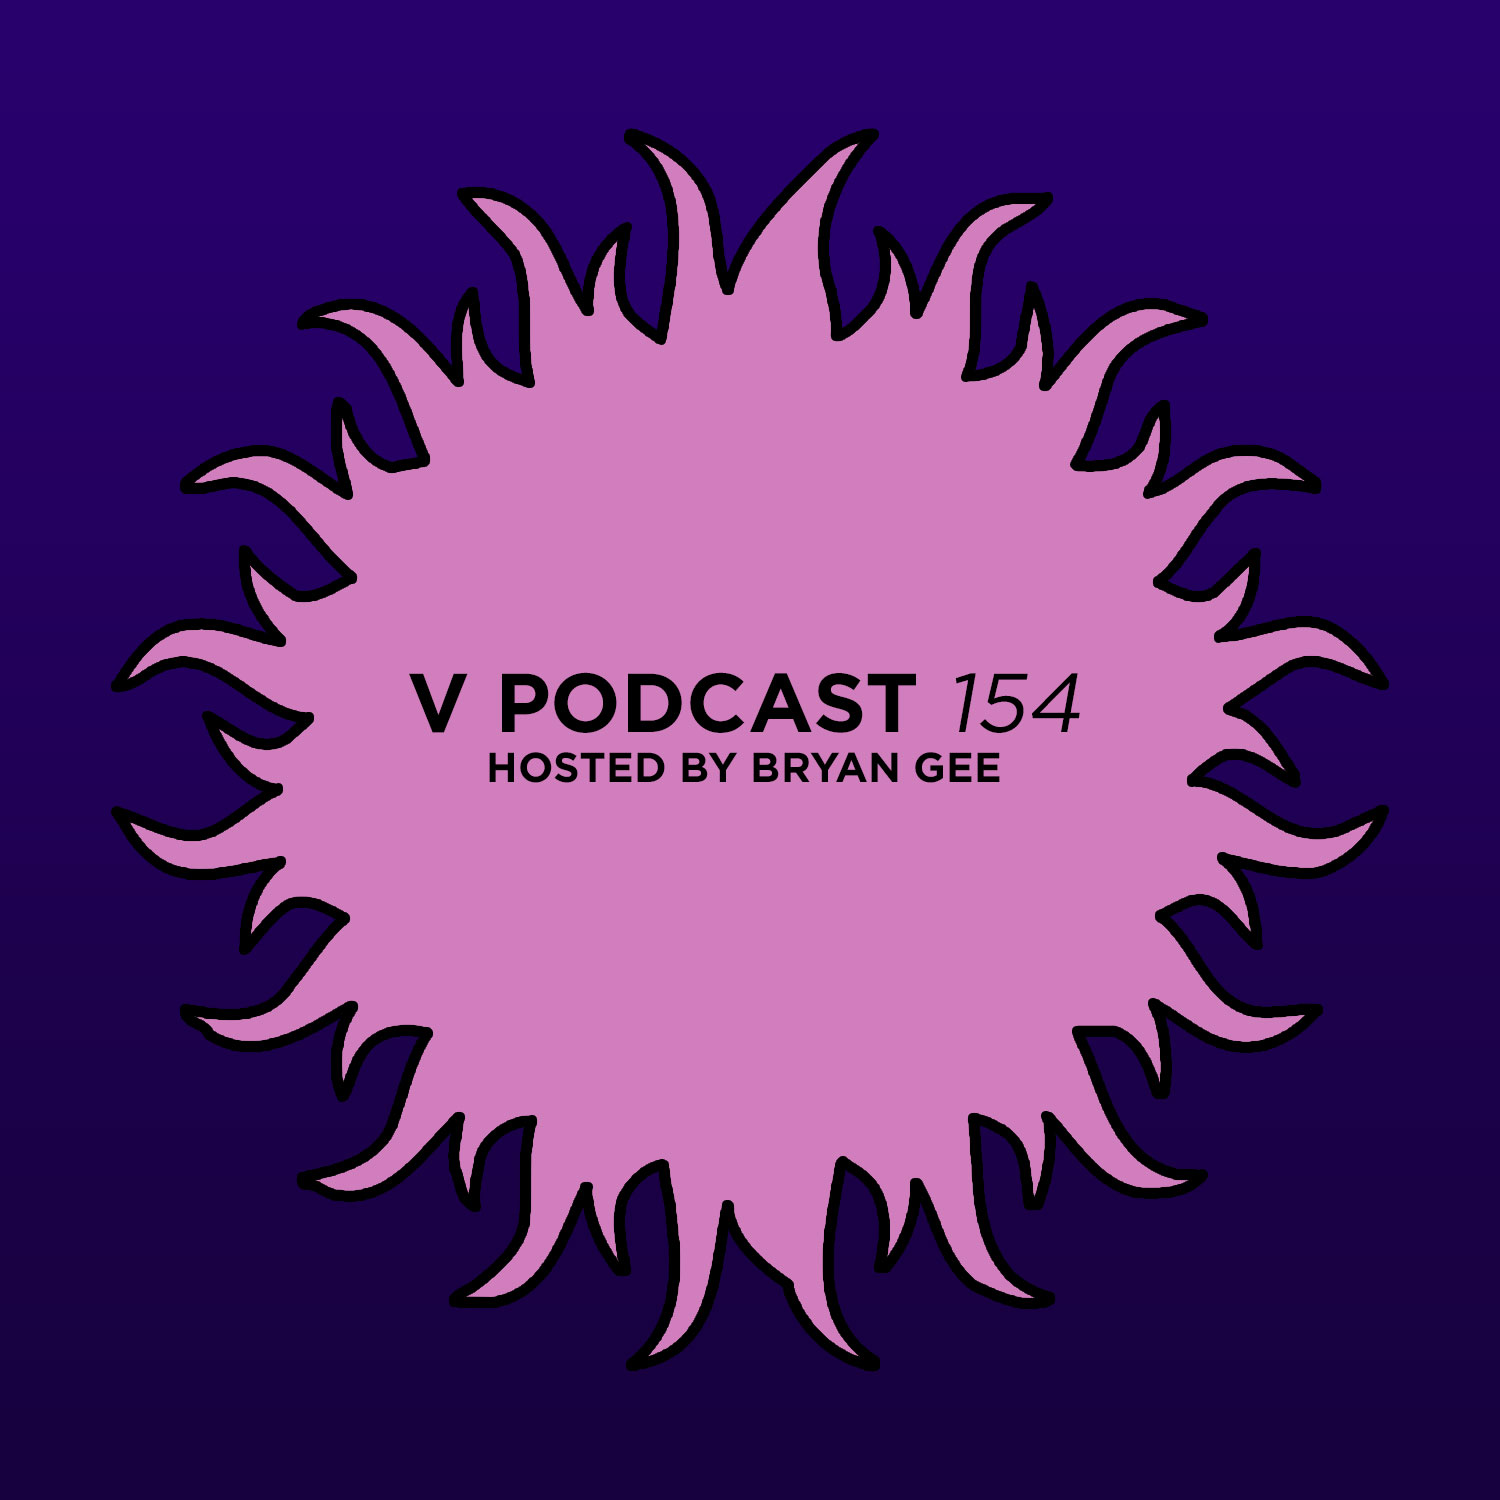 V Podcast 154 - Hosted by Bryan Gee w. Sl8r Guest Mix Artwork